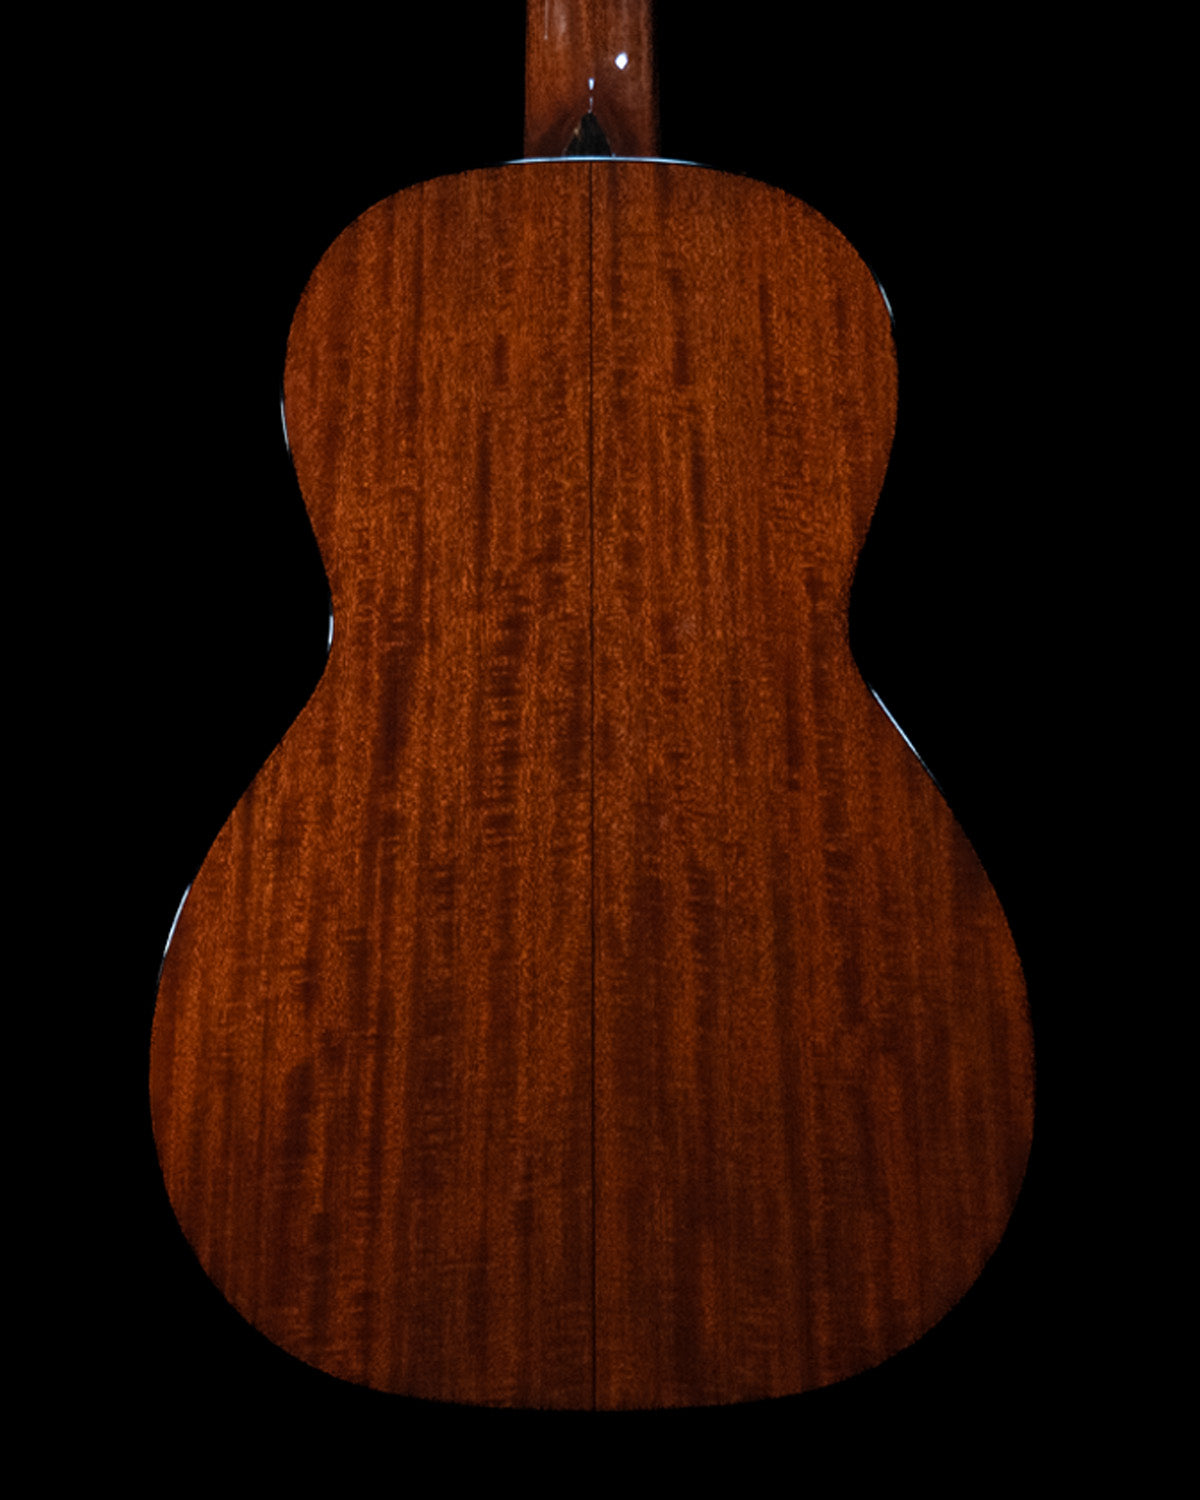 Collings 01 12-string  Small Body 12-String Acoustic Guitar